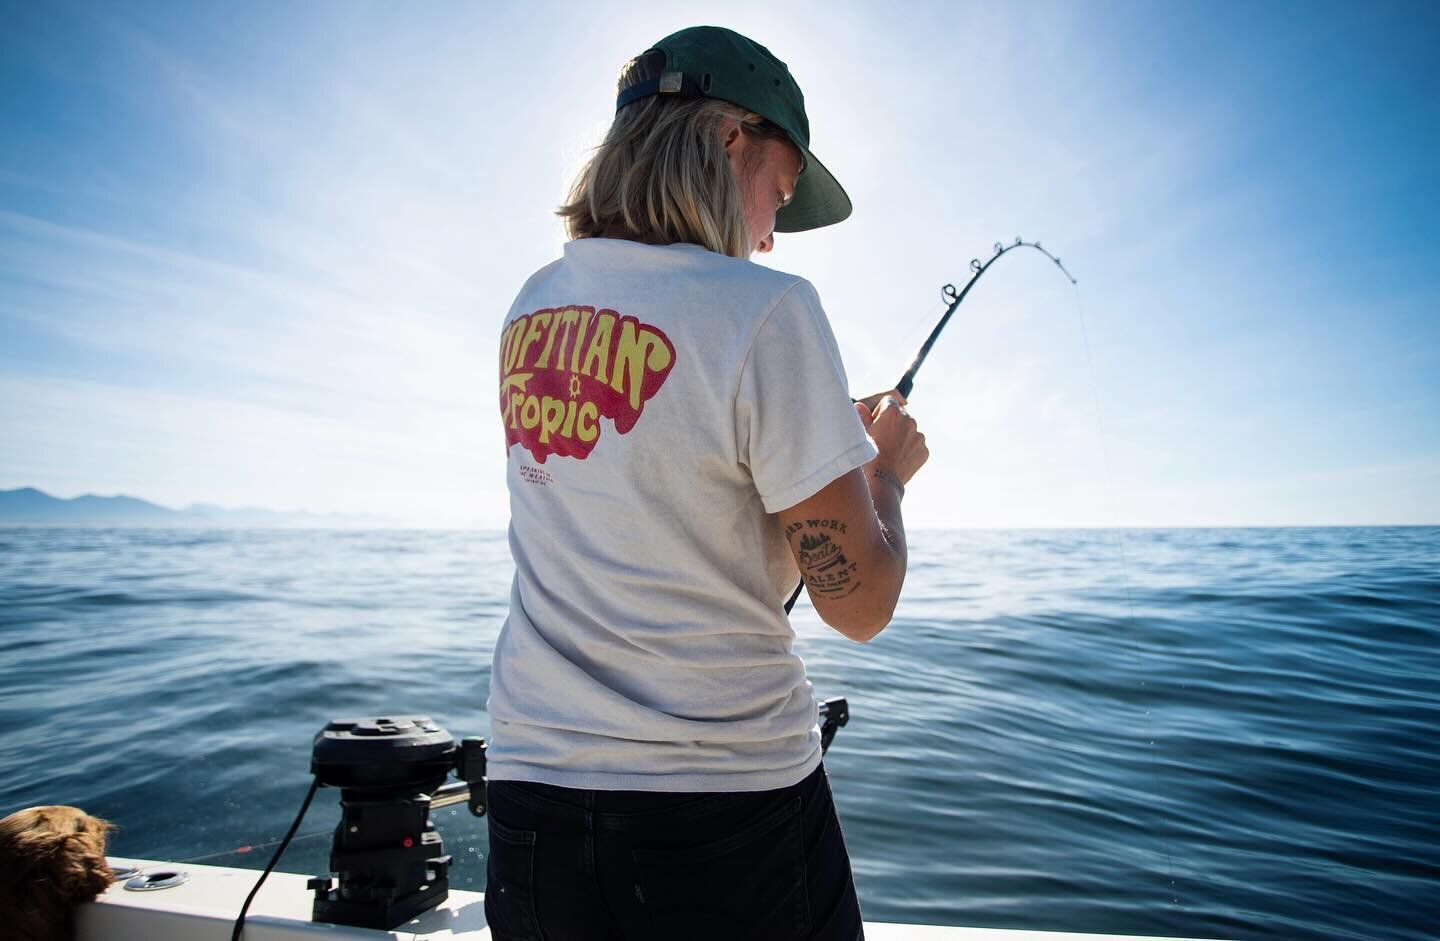 &ldquo;Fishing is for the gals&rdquo; This International Women&rsquo;s Day, we want to recogize and celebrate all the incredible women who&rsquo;ve joined us on our fishing adventures. 

We&rsquo;re thrilled to announce our upcoming partnership with 